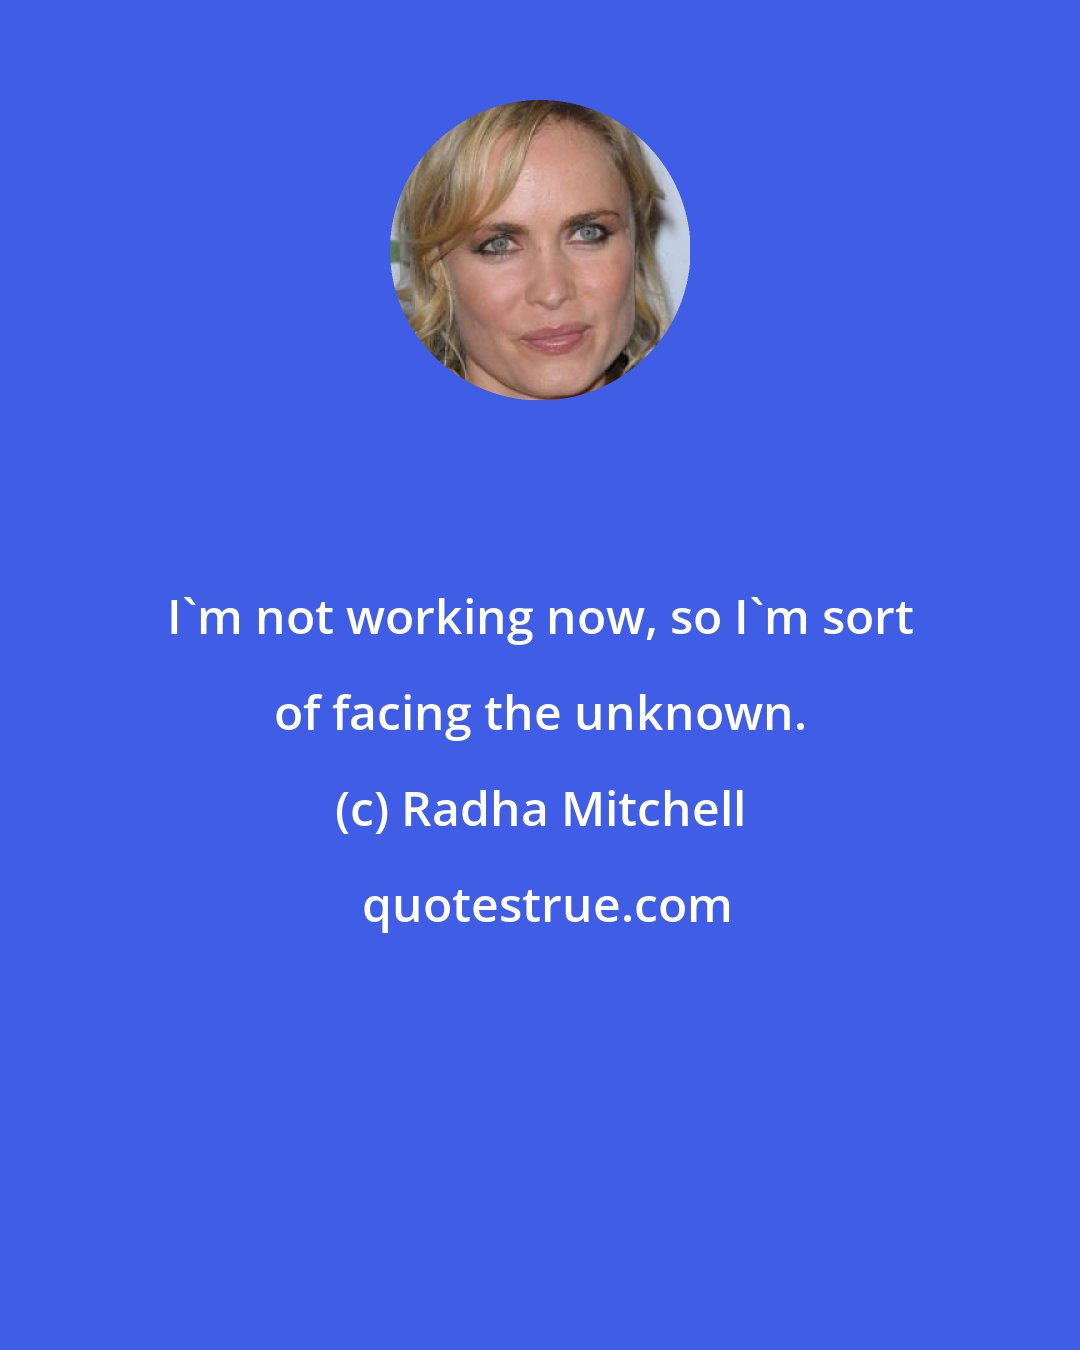 Radha Mitchell: I'm not working now, so I'm sort of facing the unknown.